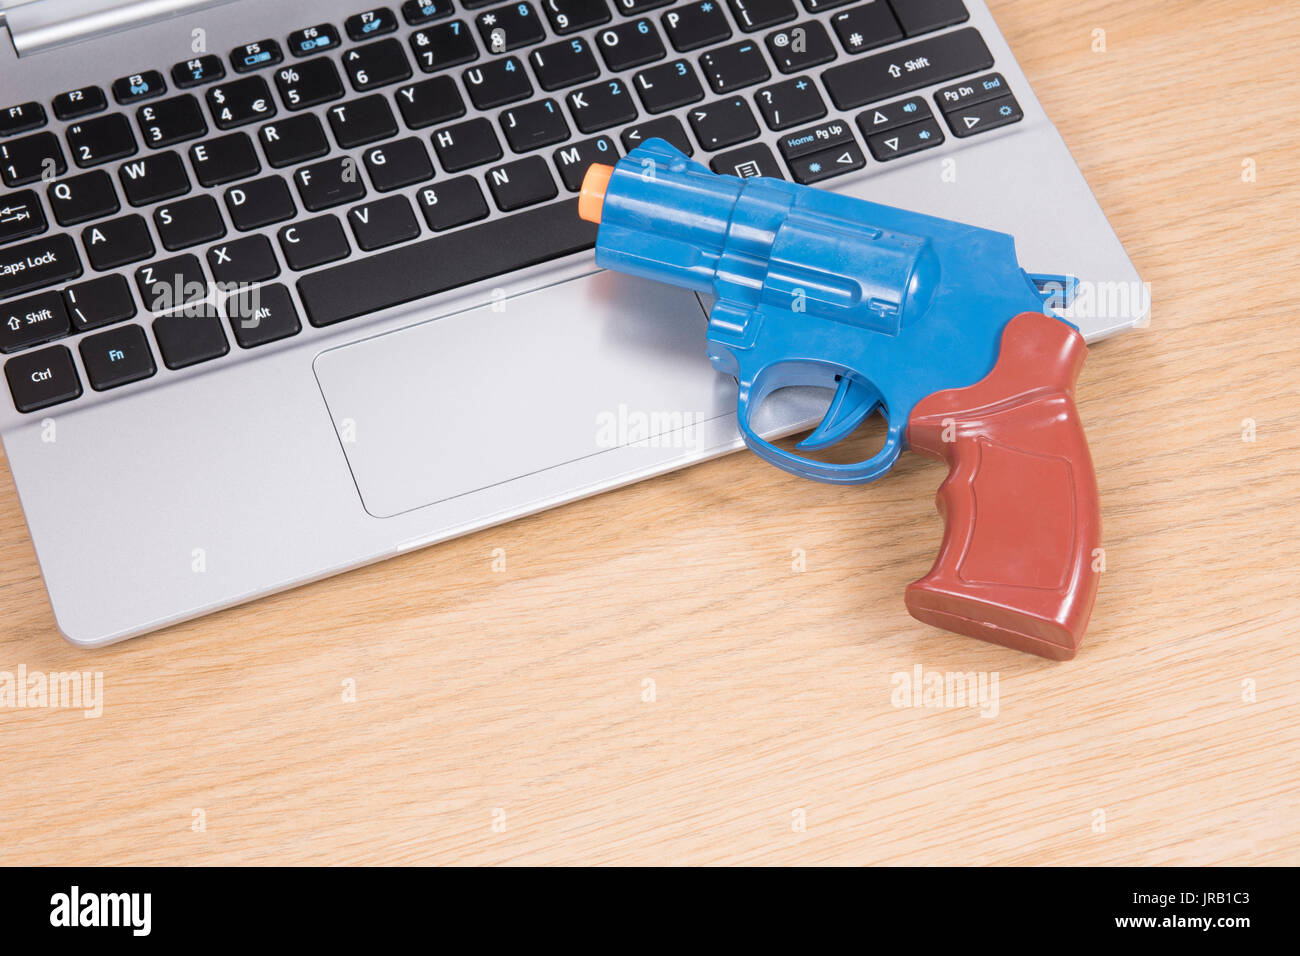 Colorful toy handgun lying on a laptop computer in a concept of online ransomware, fraud, crime, or identity theft and hacking Stock Photo